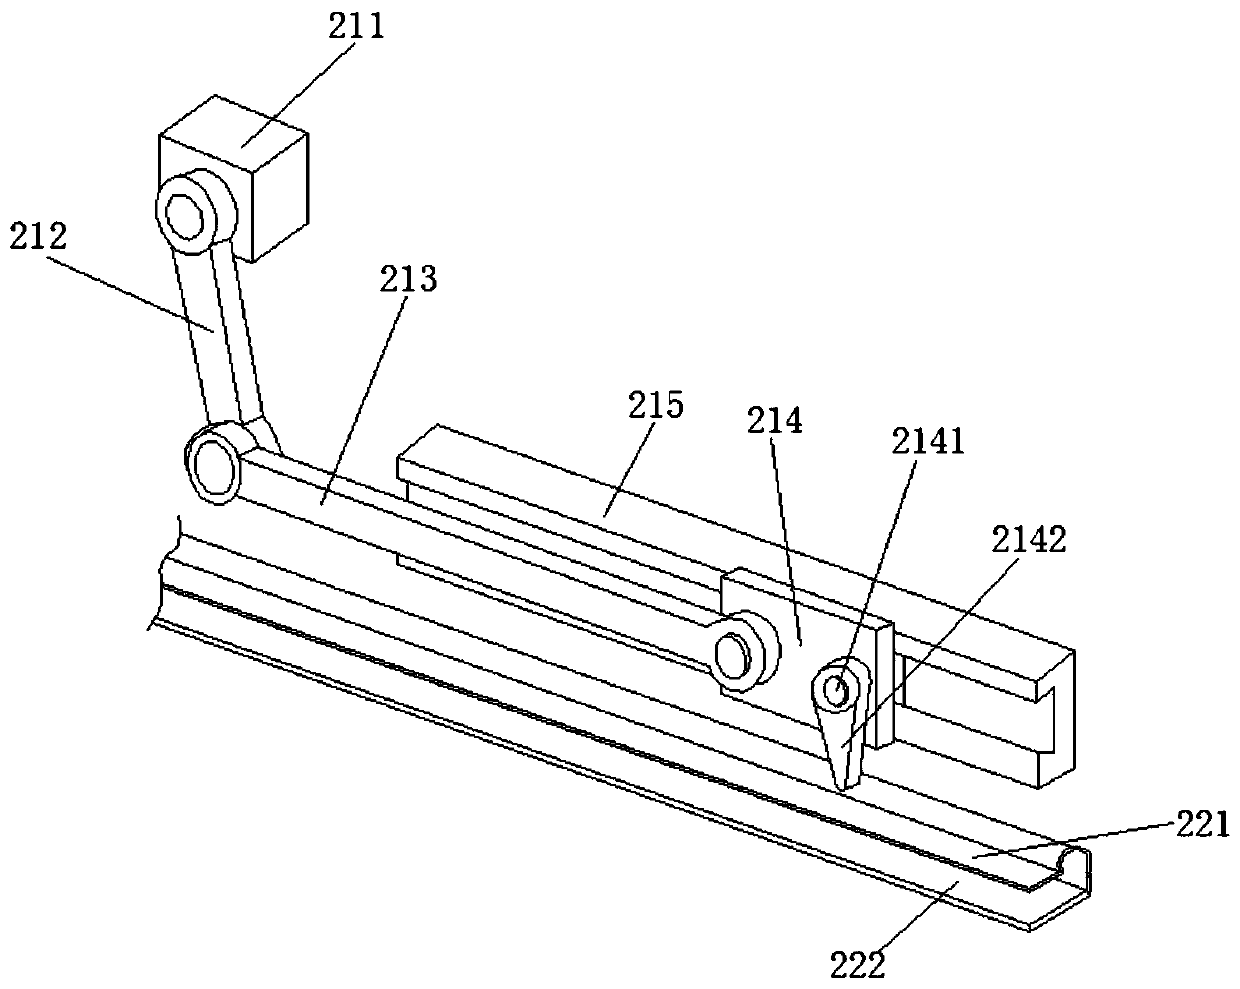 A clamping and positioning device for laser tailor welding